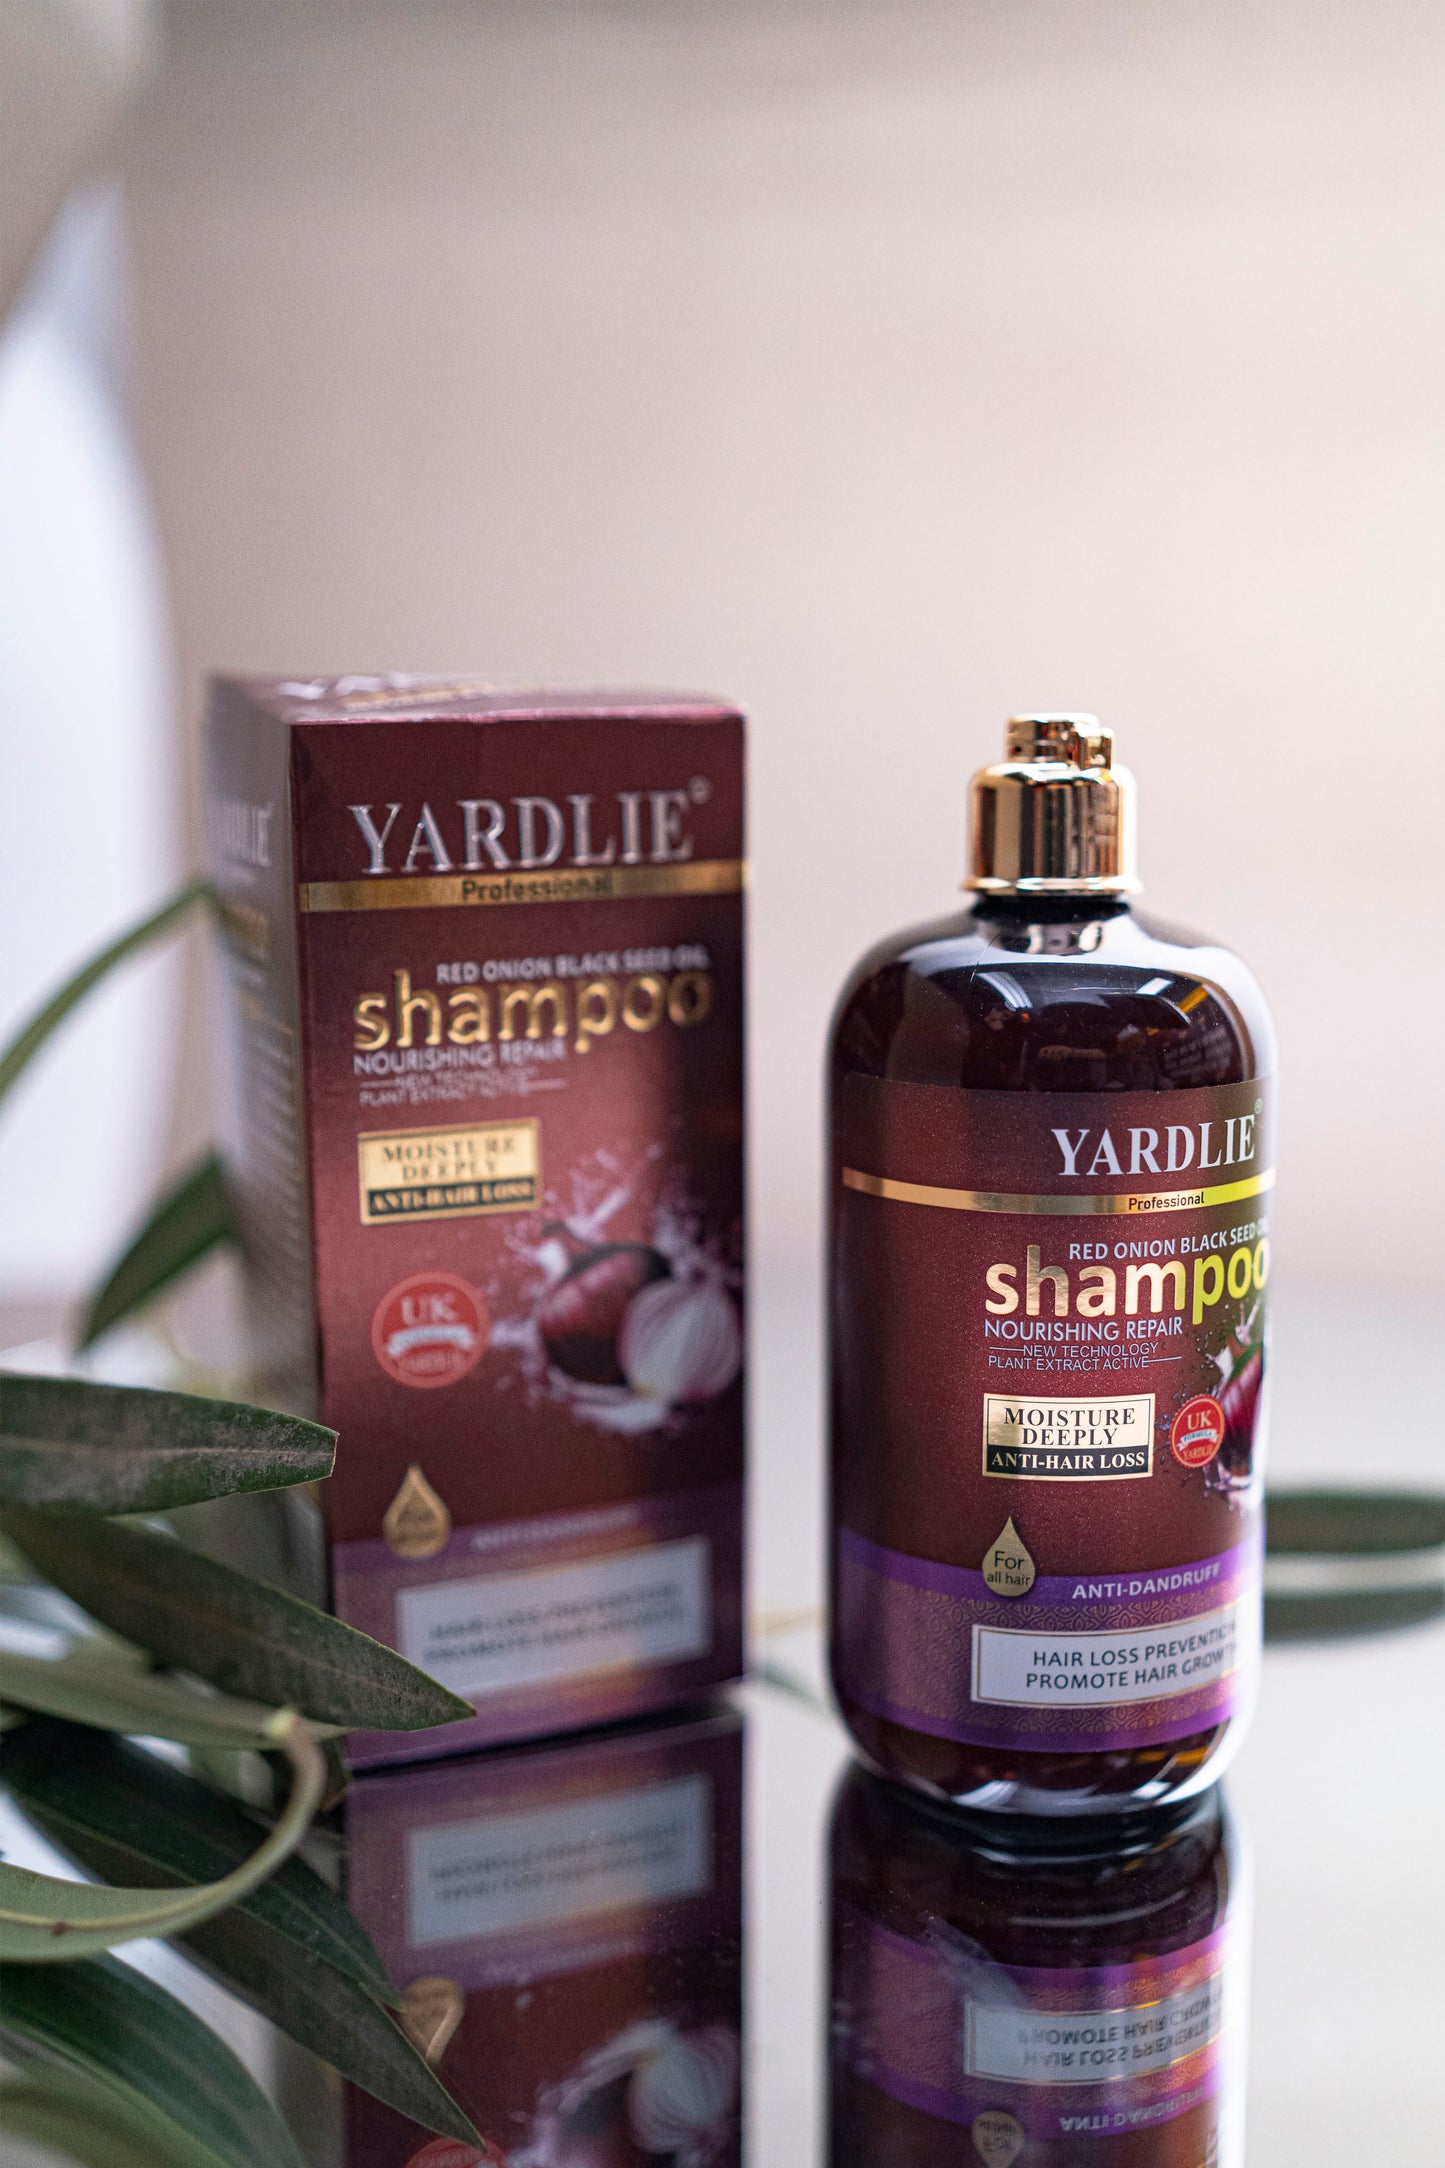 Yardlie Professional Red Onion Black Seed With Flower Aroma Shampoo 500g.